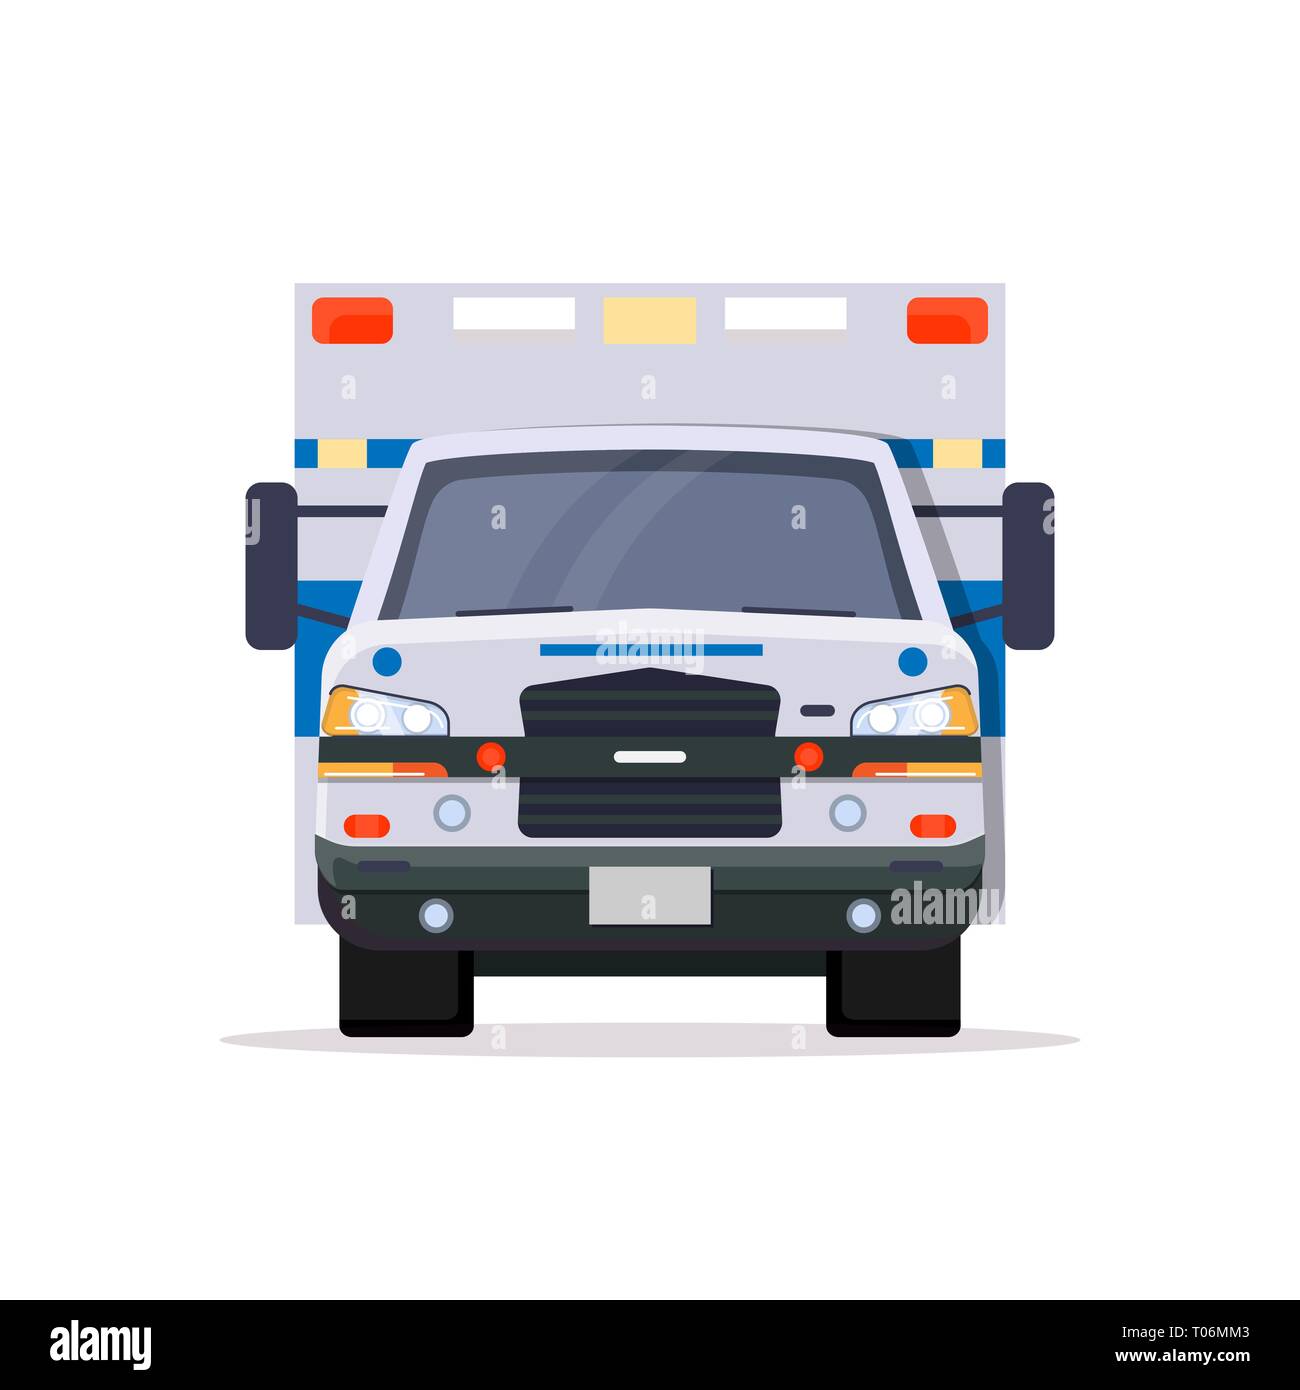 Front view of ambulance car  Stock Vector